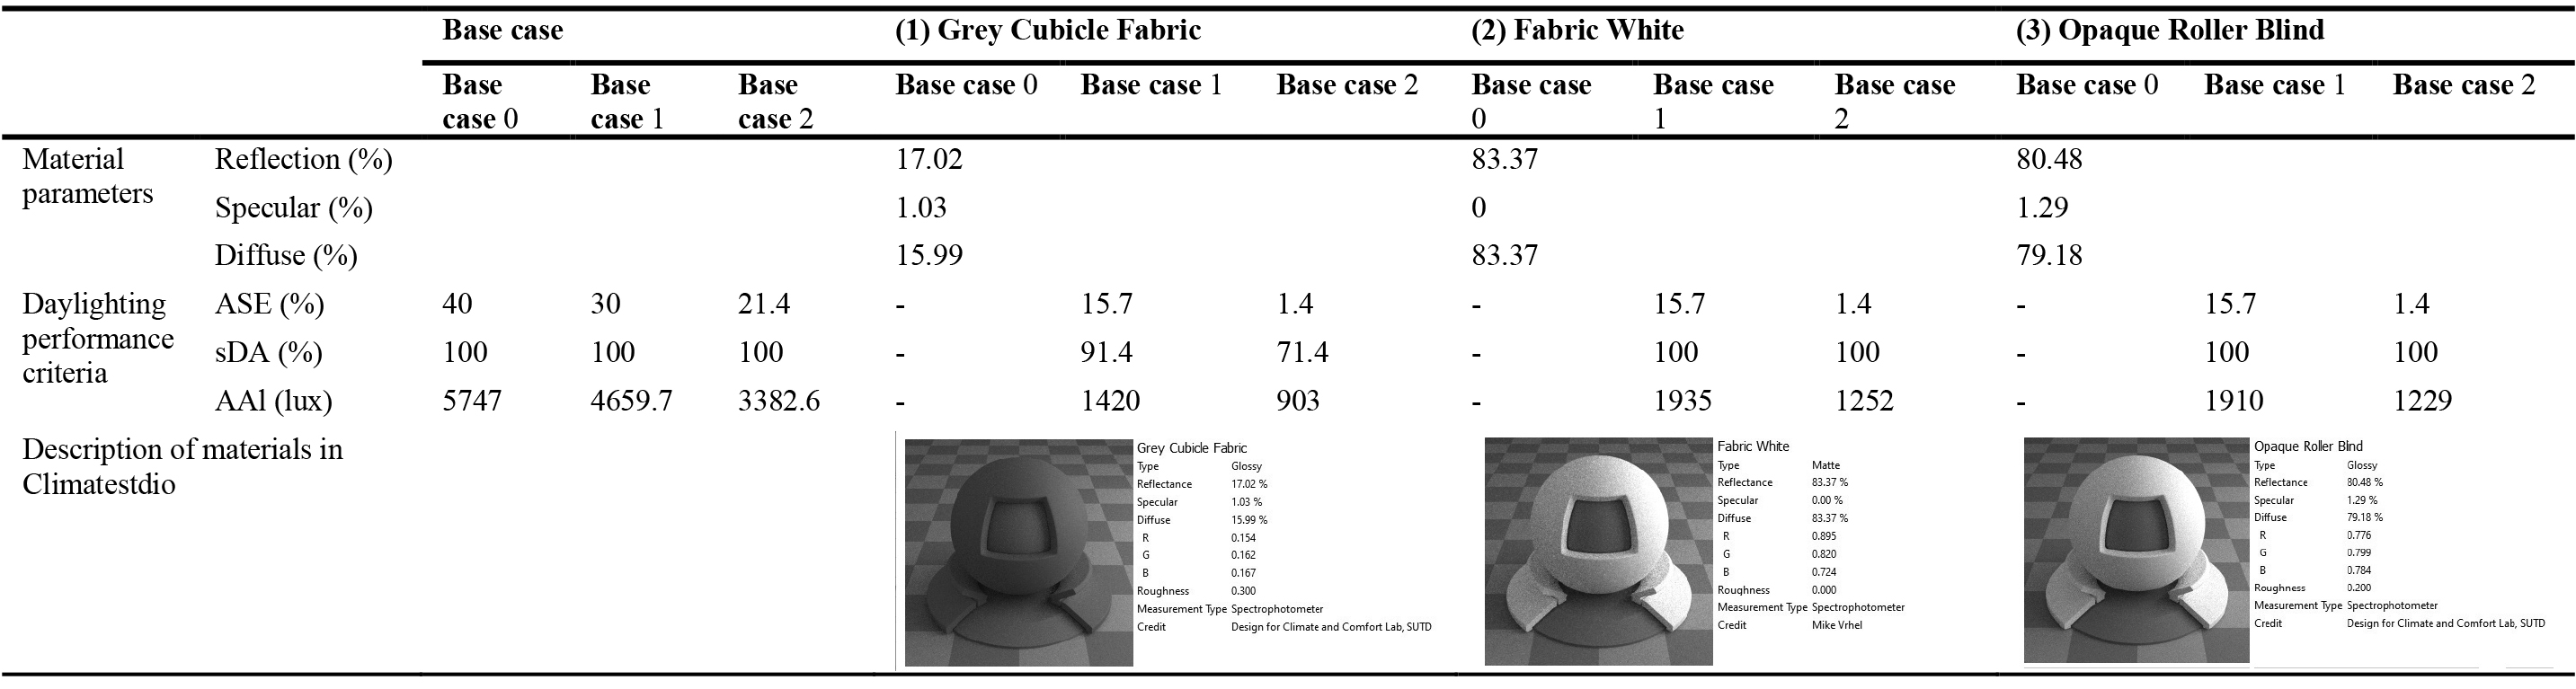 Simulation results of the suggested 3 materials compared to base cases.